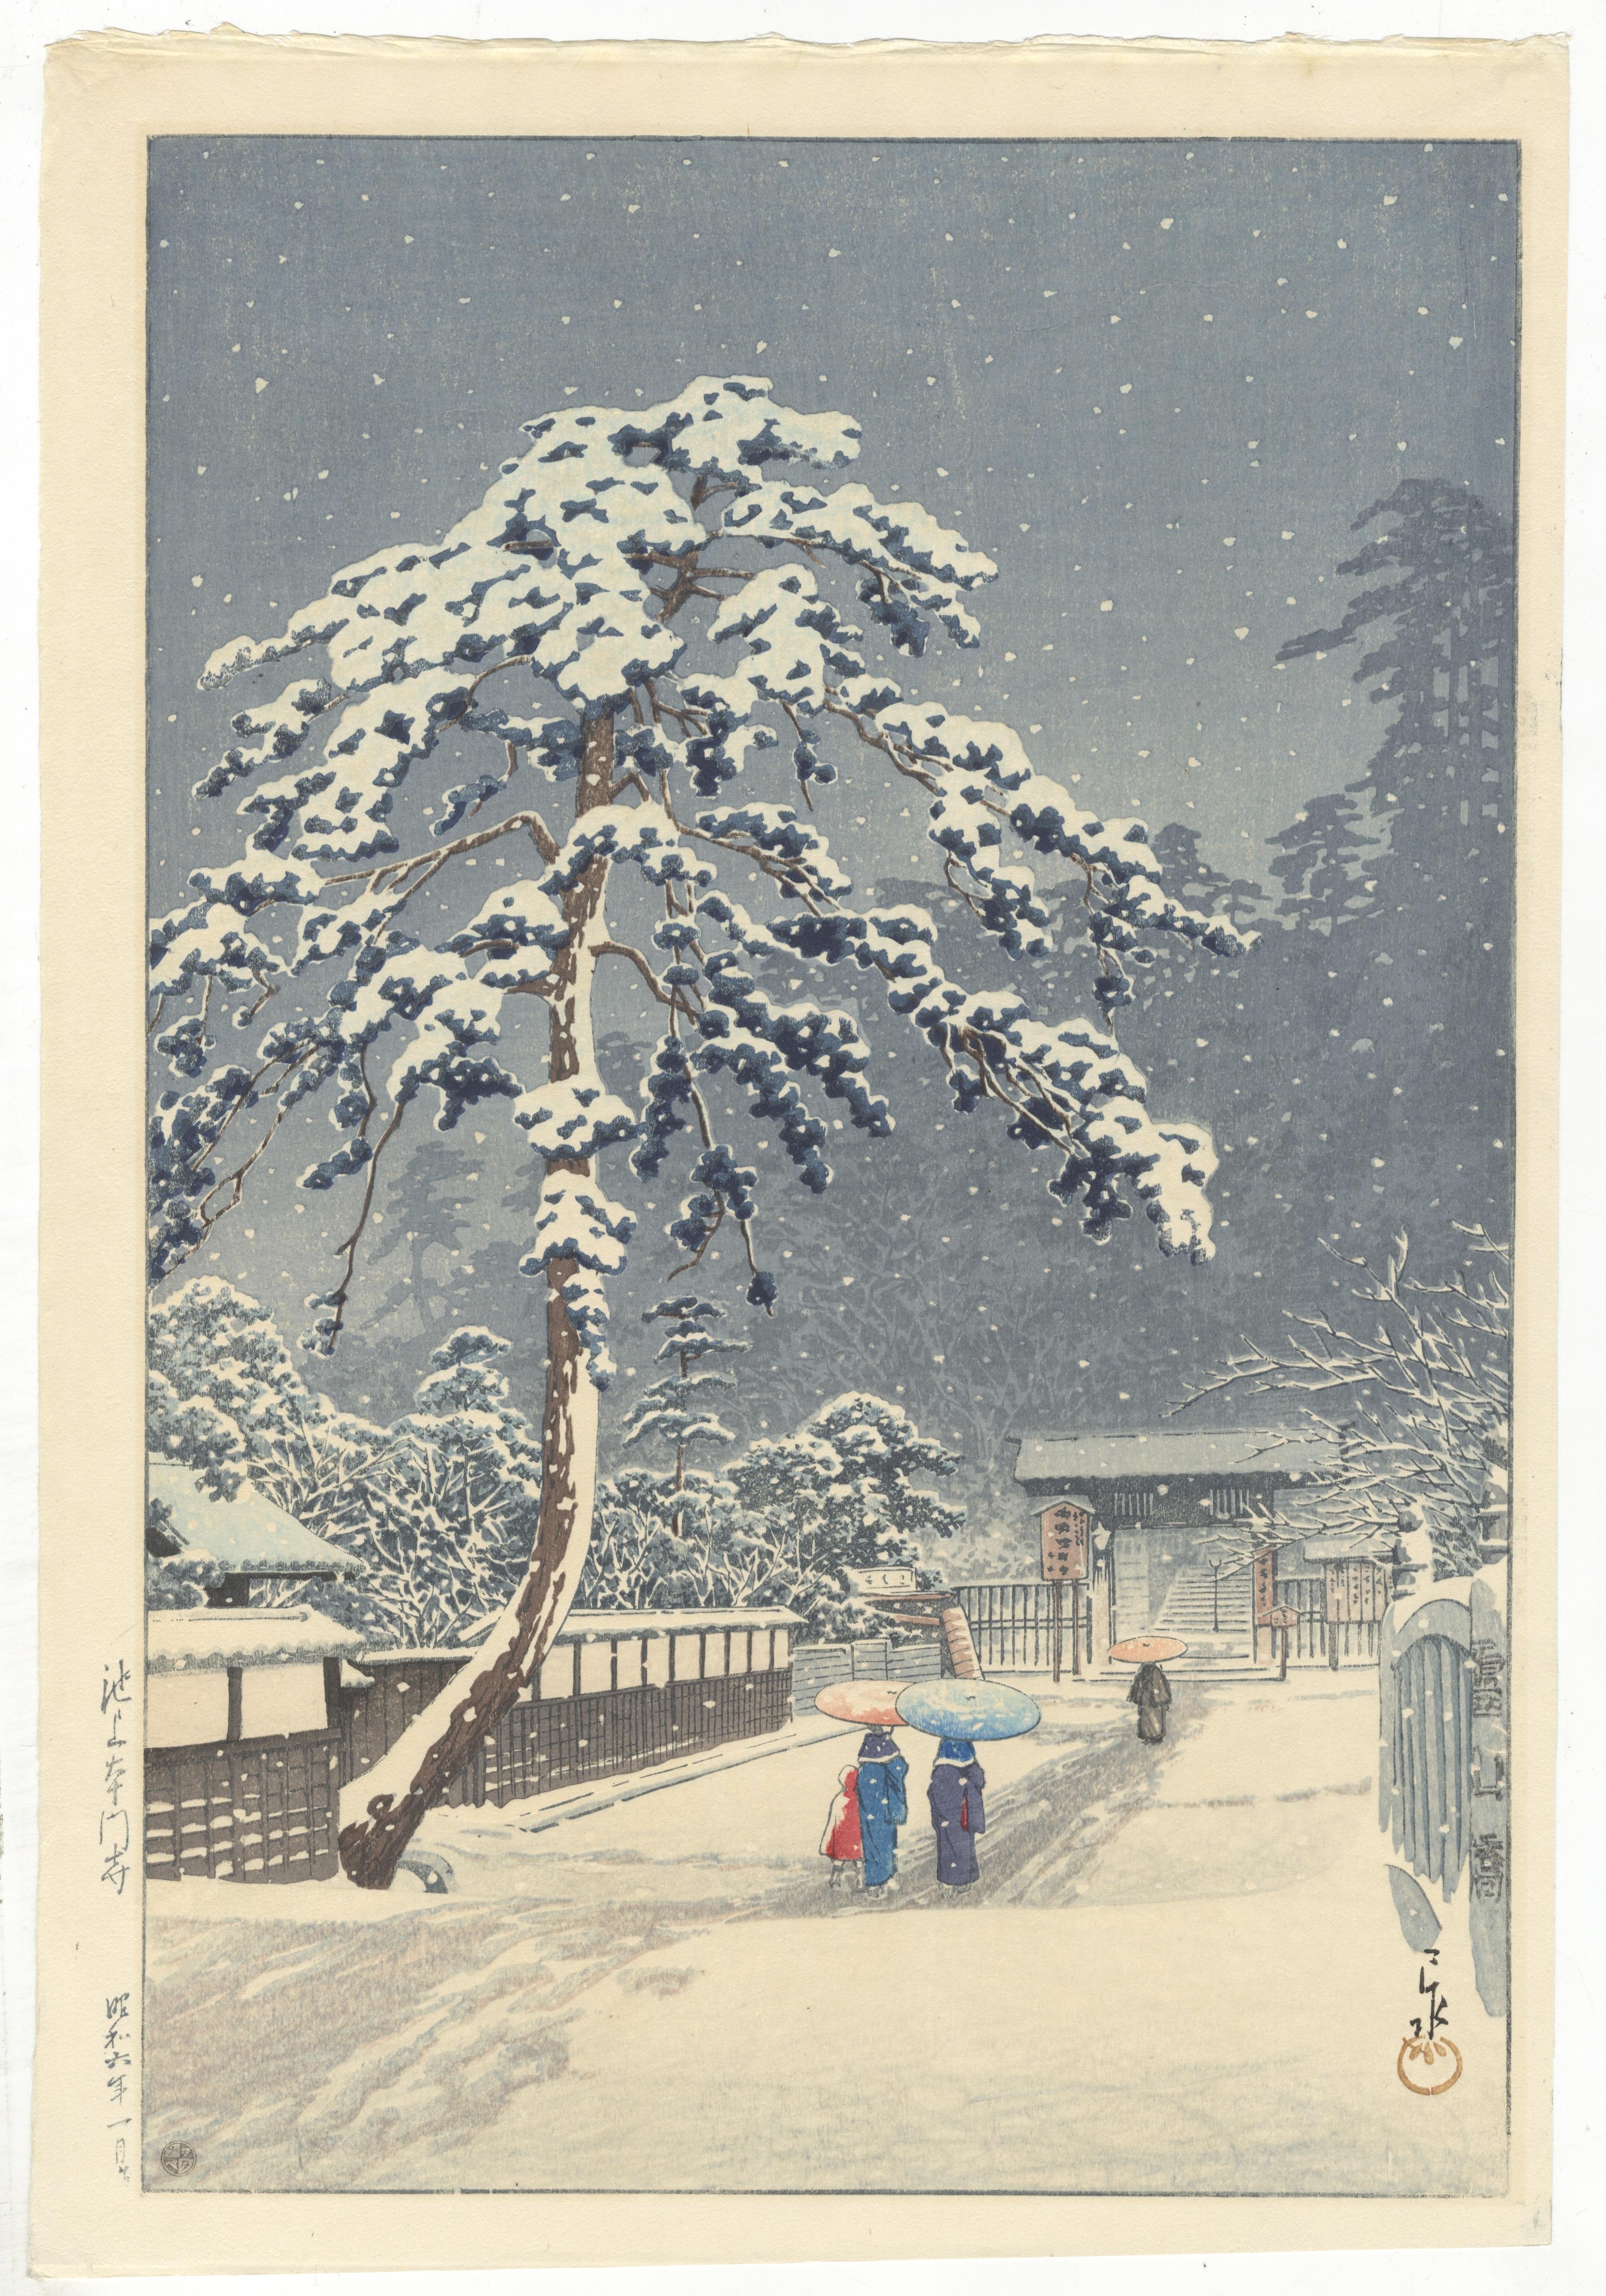 Artist: Hasui Kawase (1883-1957)
Title: Honmonji Temple at Ikegami
Publisher: Watanabe Shozaburo
Date: 1946-1957
Condition report: Black border slightly faded, some marks from the previous mounting, light crease on the top.
Size: 27.3 x 39.3